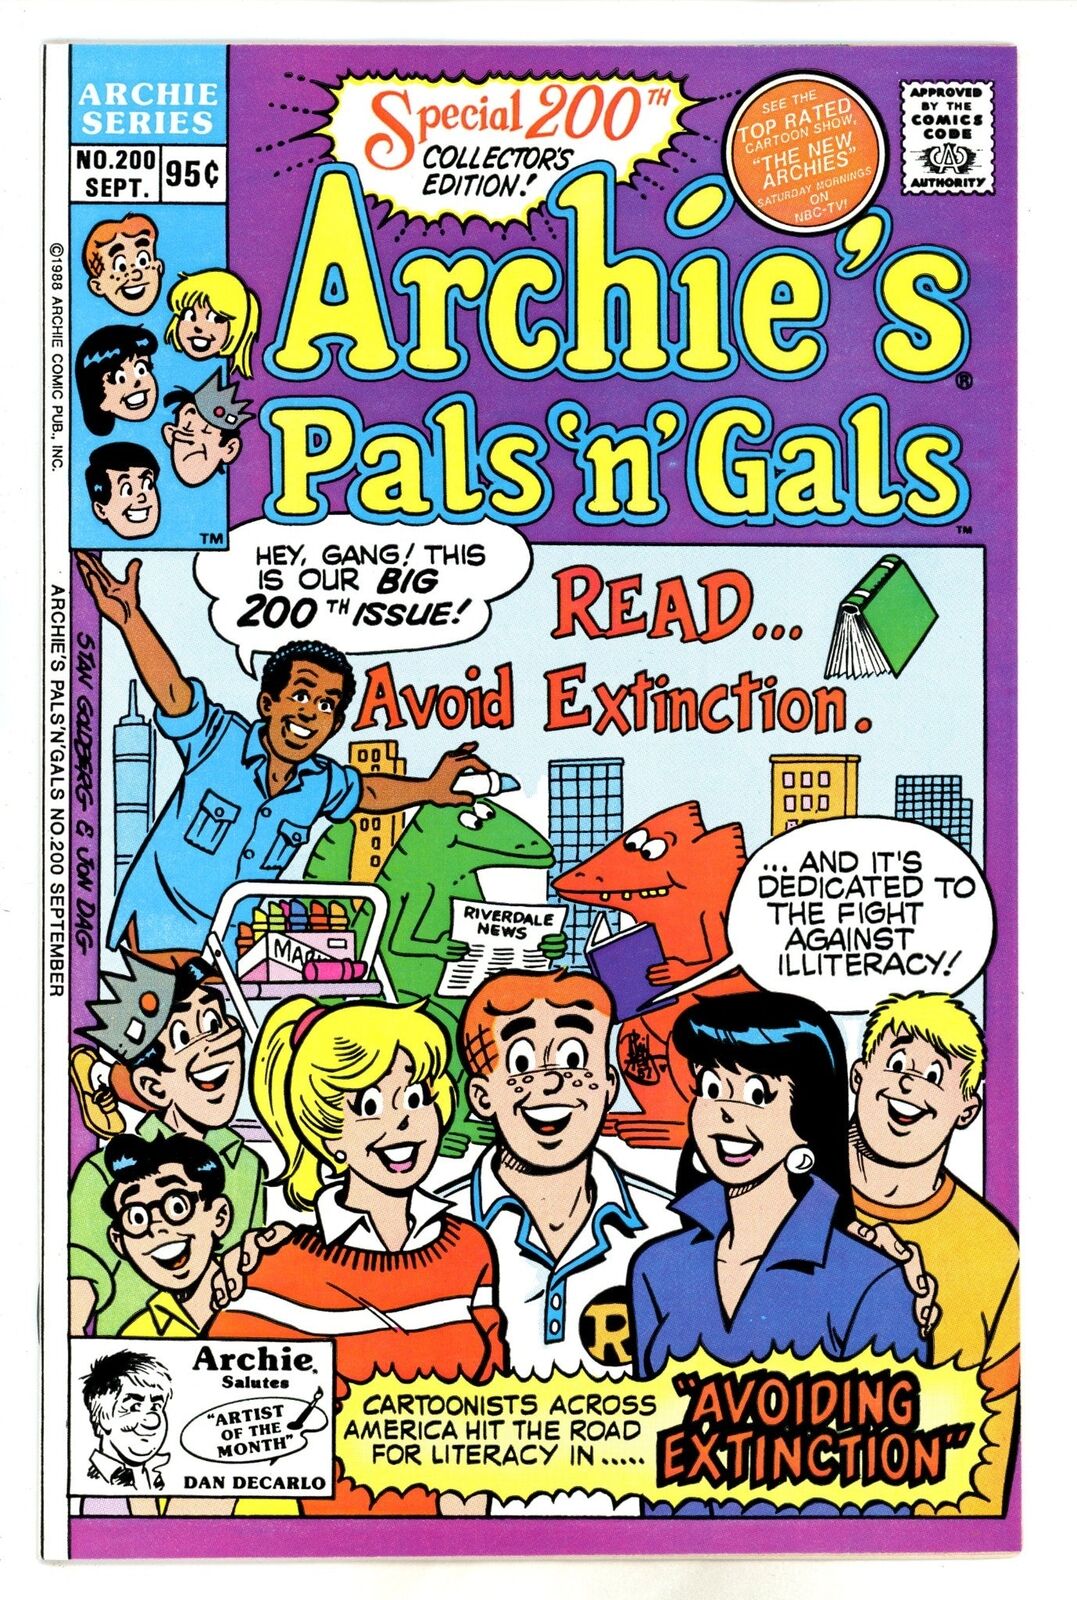 Archie's Pals 'n' Gals #200 CPV with logo